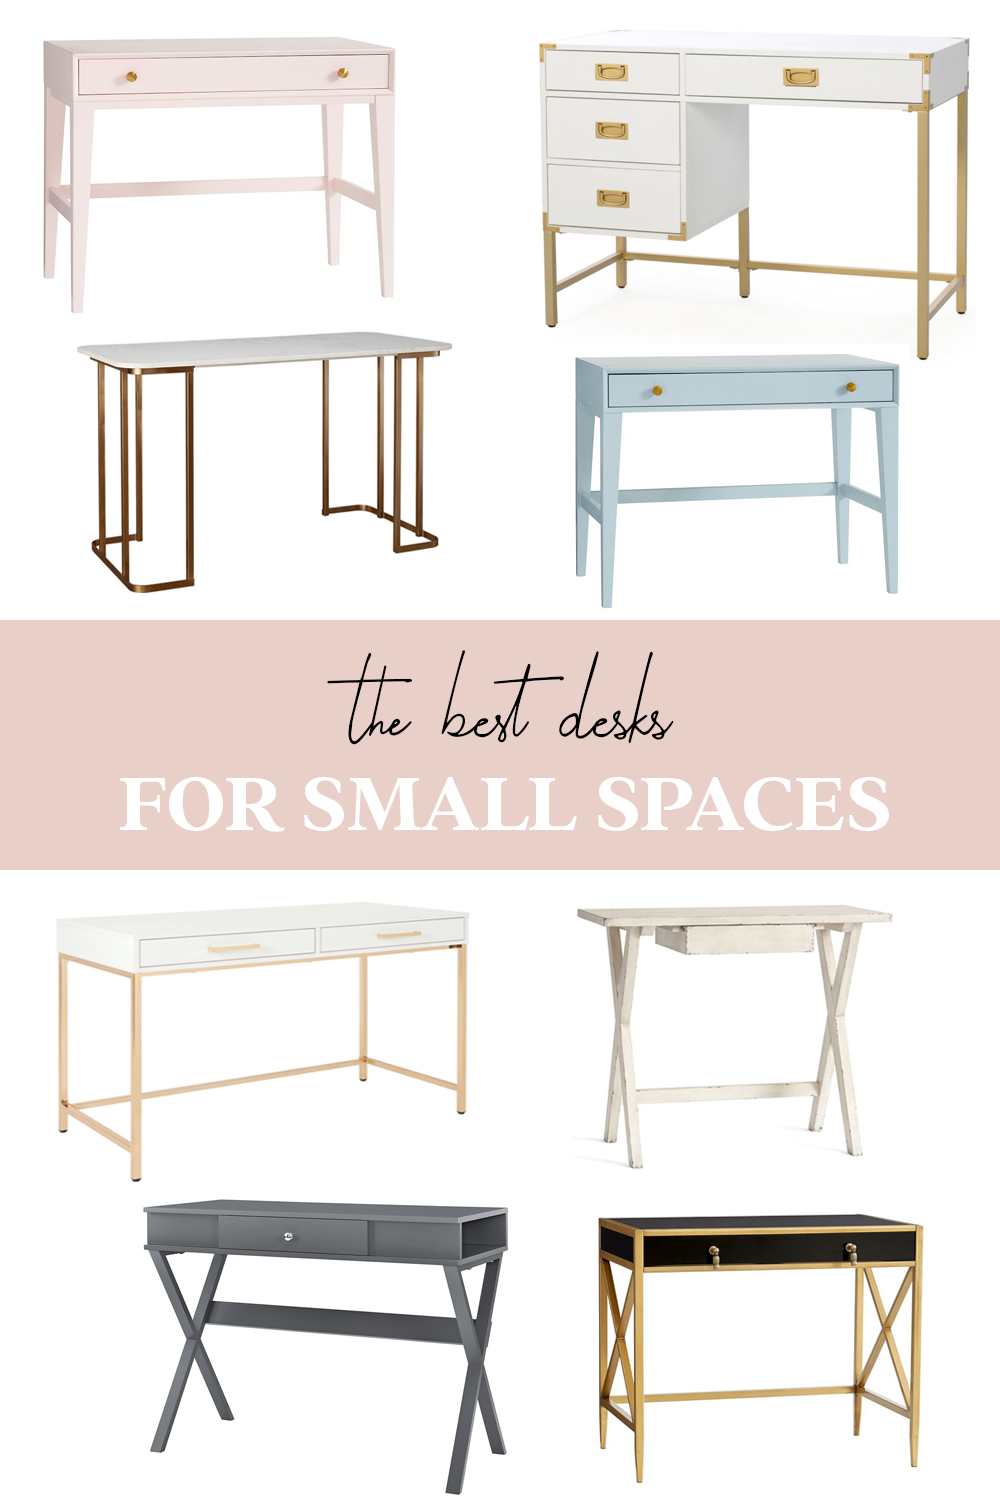 The Best Desks for Small Spaces - Money Can Buy Lipstick